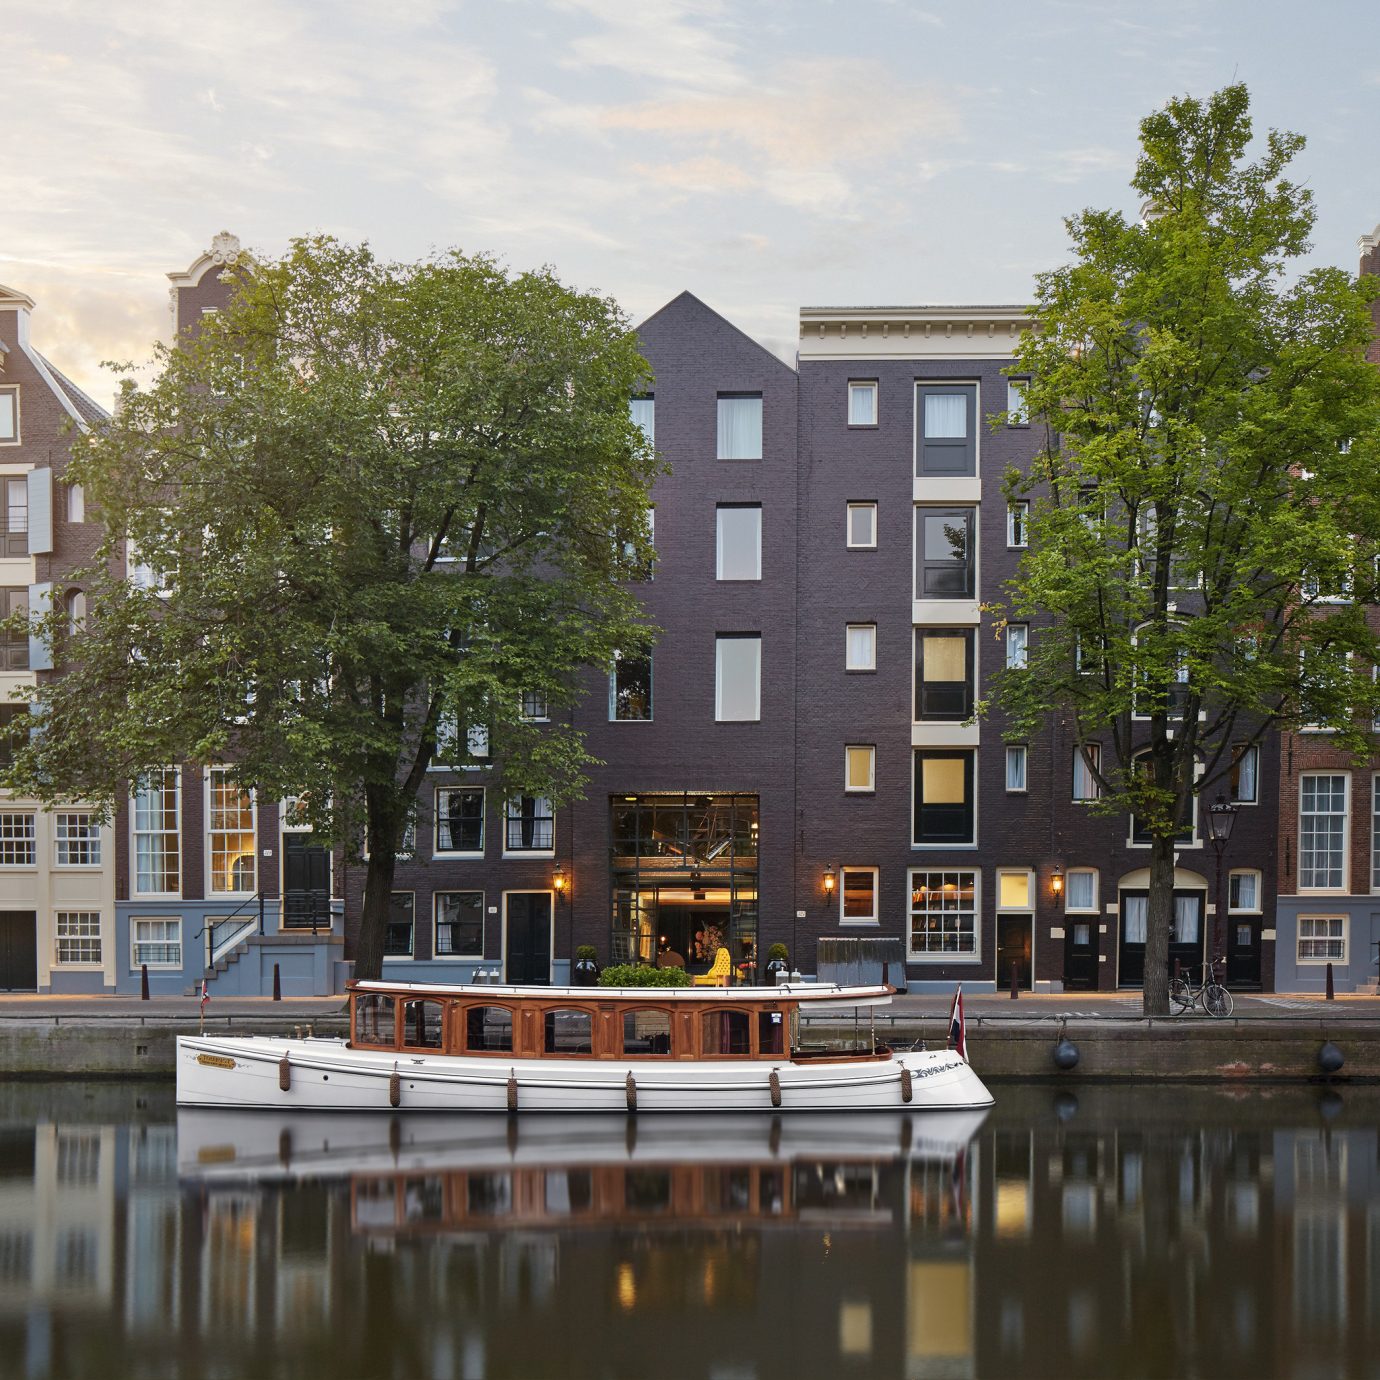 Amsterdam Boutique Hotels Hotels The Netherlands Trip Ideas outdoor sky water Canal City neighbourhood landmark Town urban area tower block waterway residential area reflection house cityscape human settlement Architecture Downtown River condominium facade town square skyline